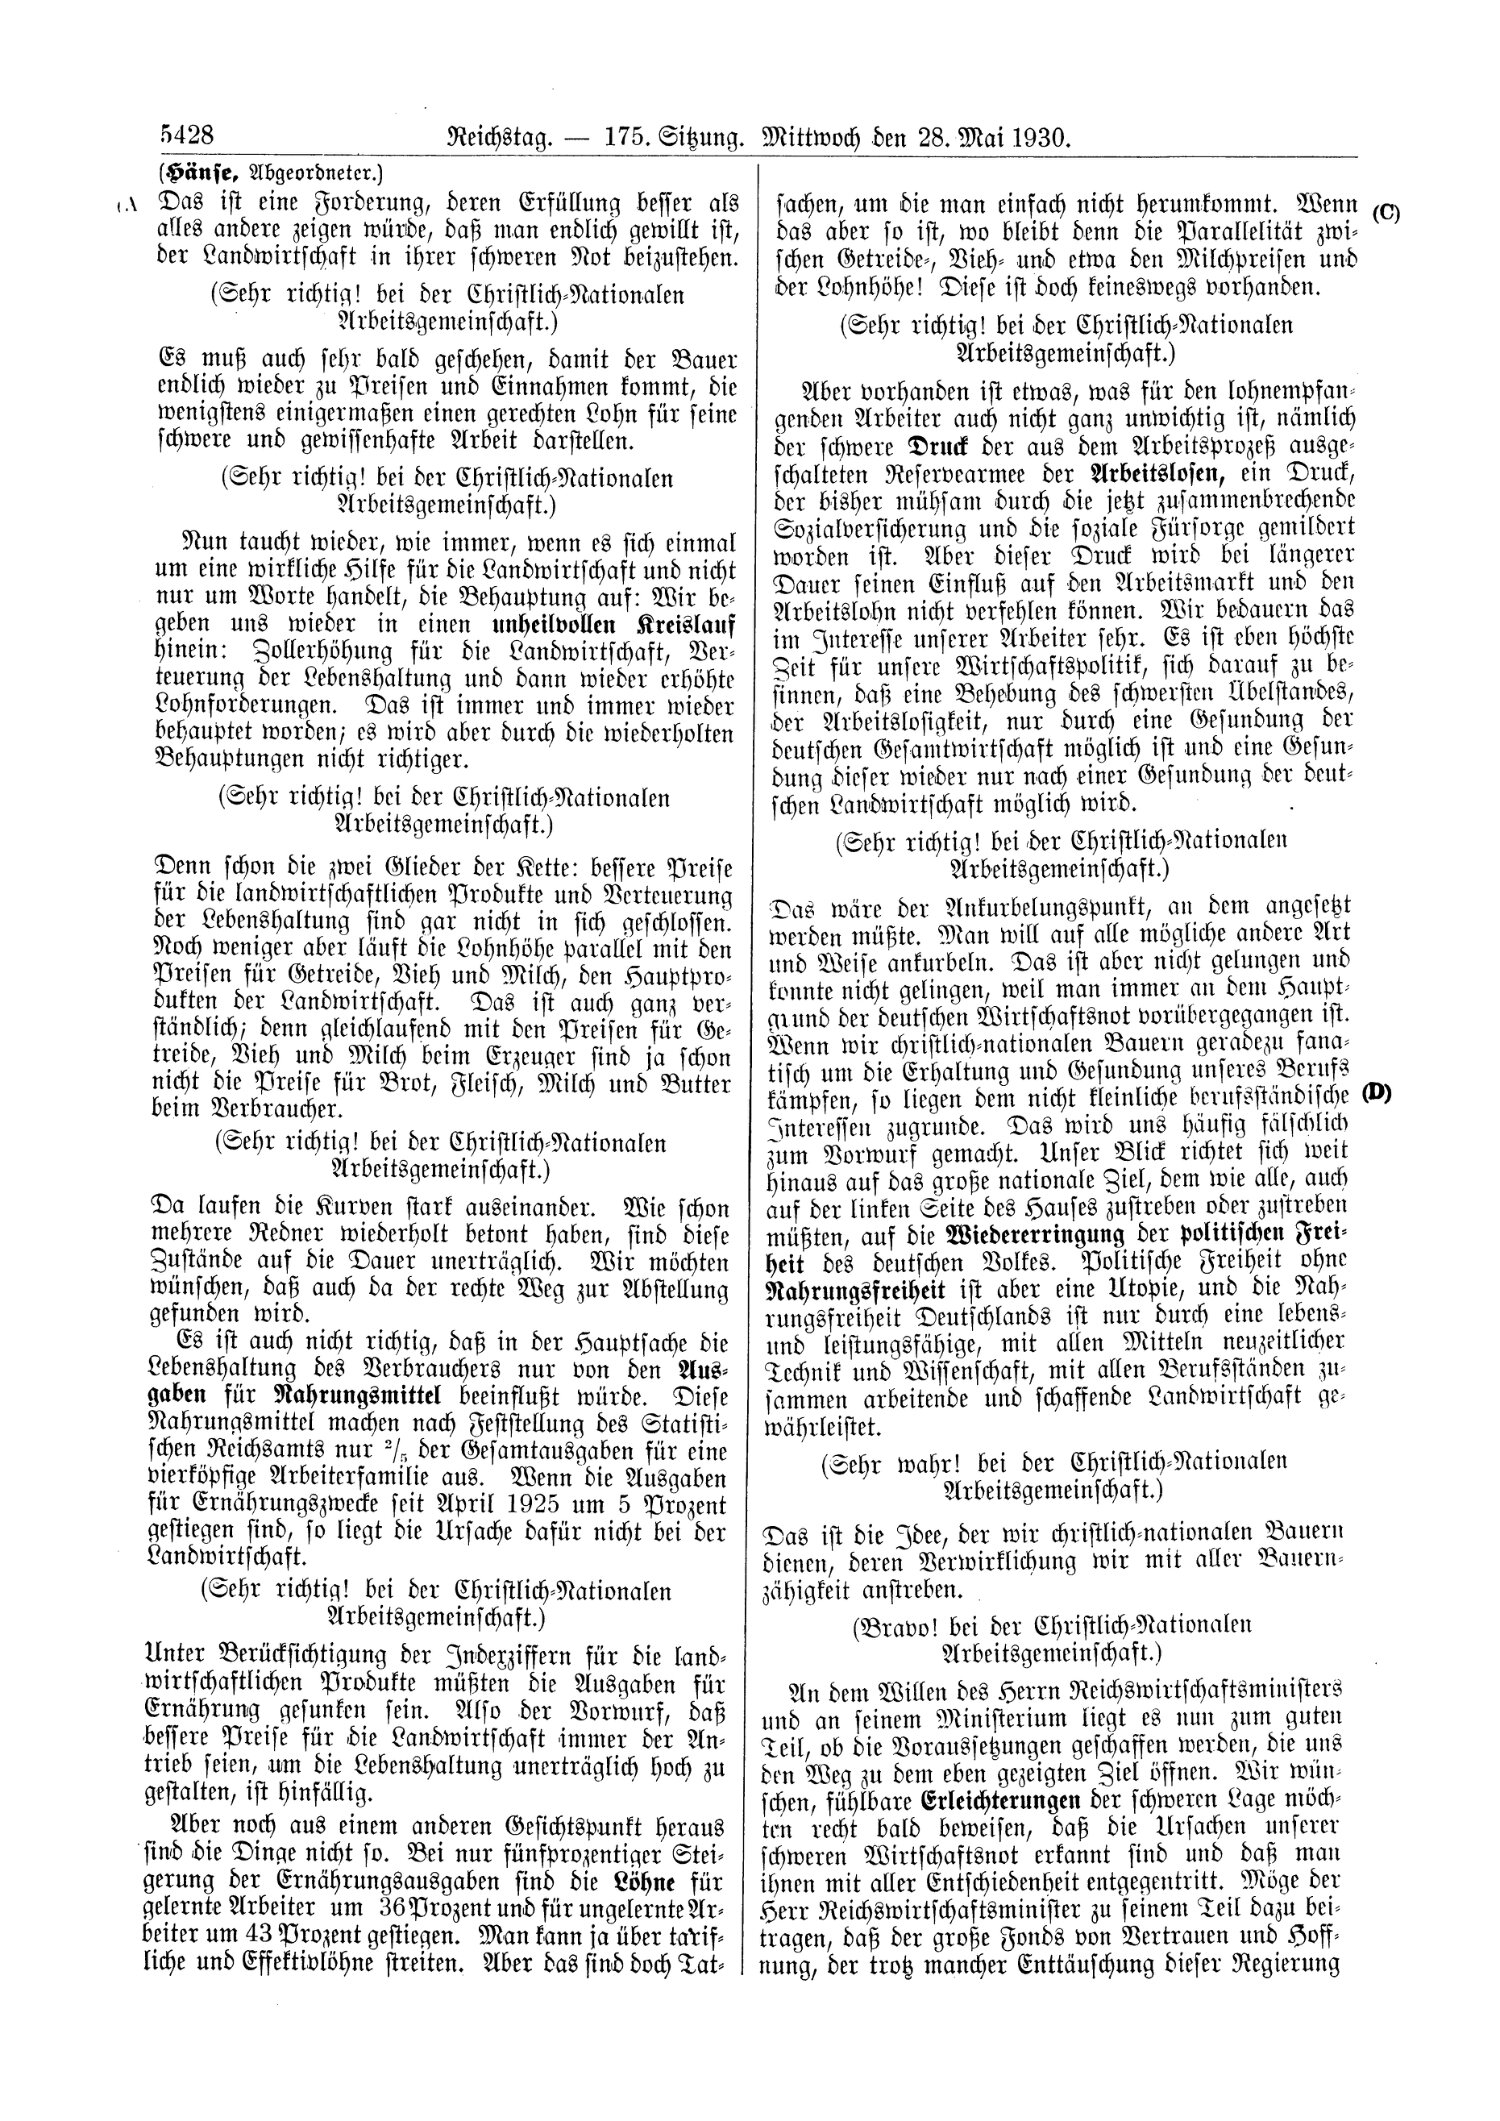 Scan of page 5428